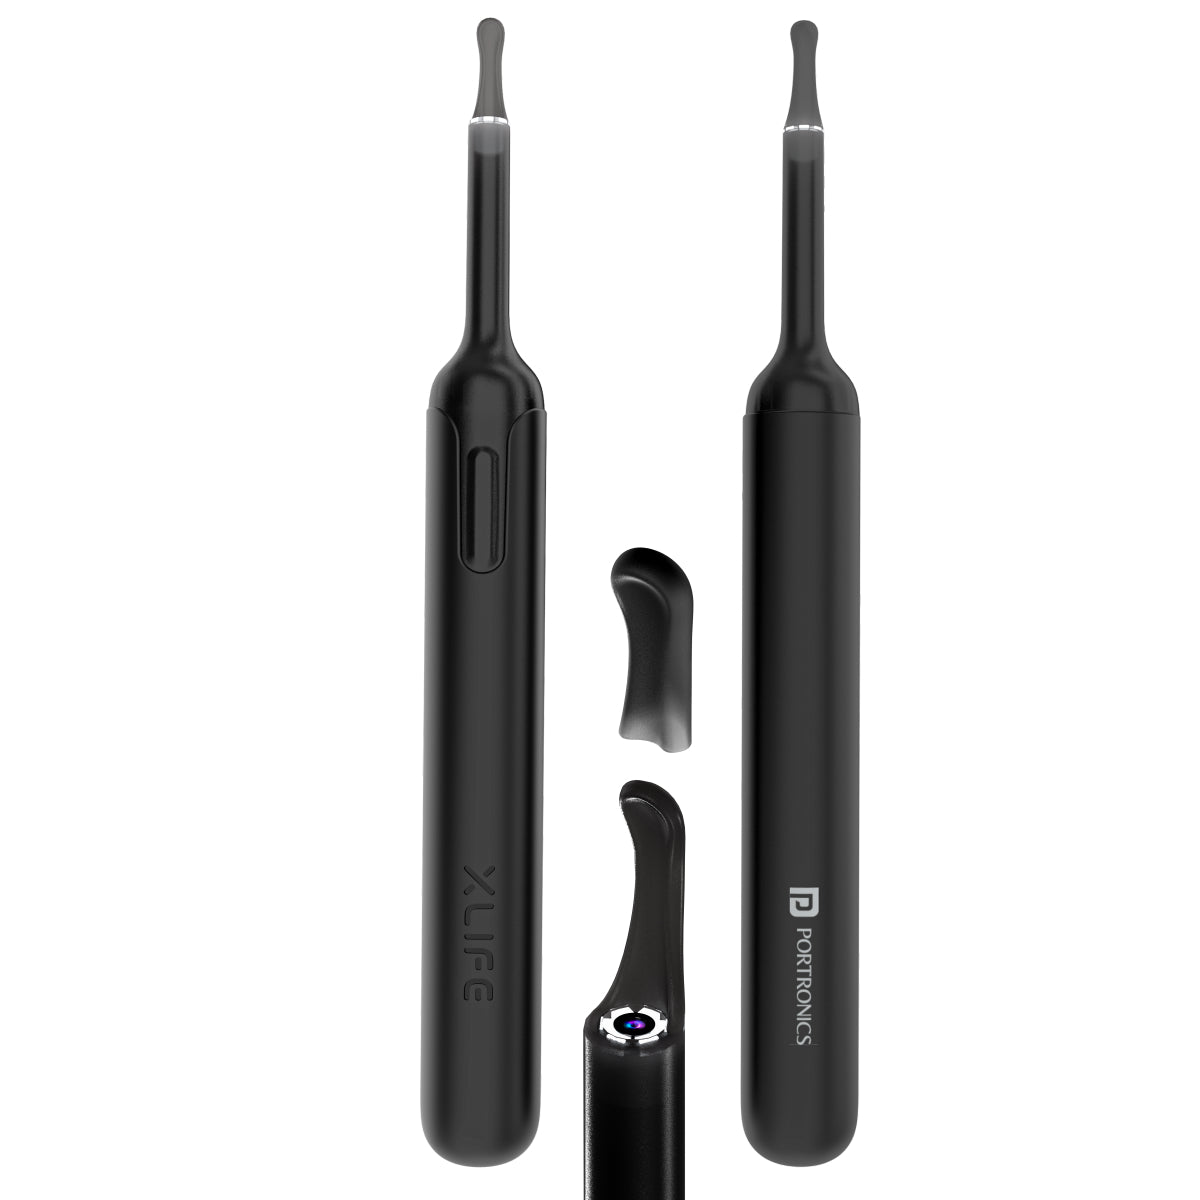 Buy Portronics XLIFE Wireless 2.4 GHz Ear Cleaner with 1080p FHD View